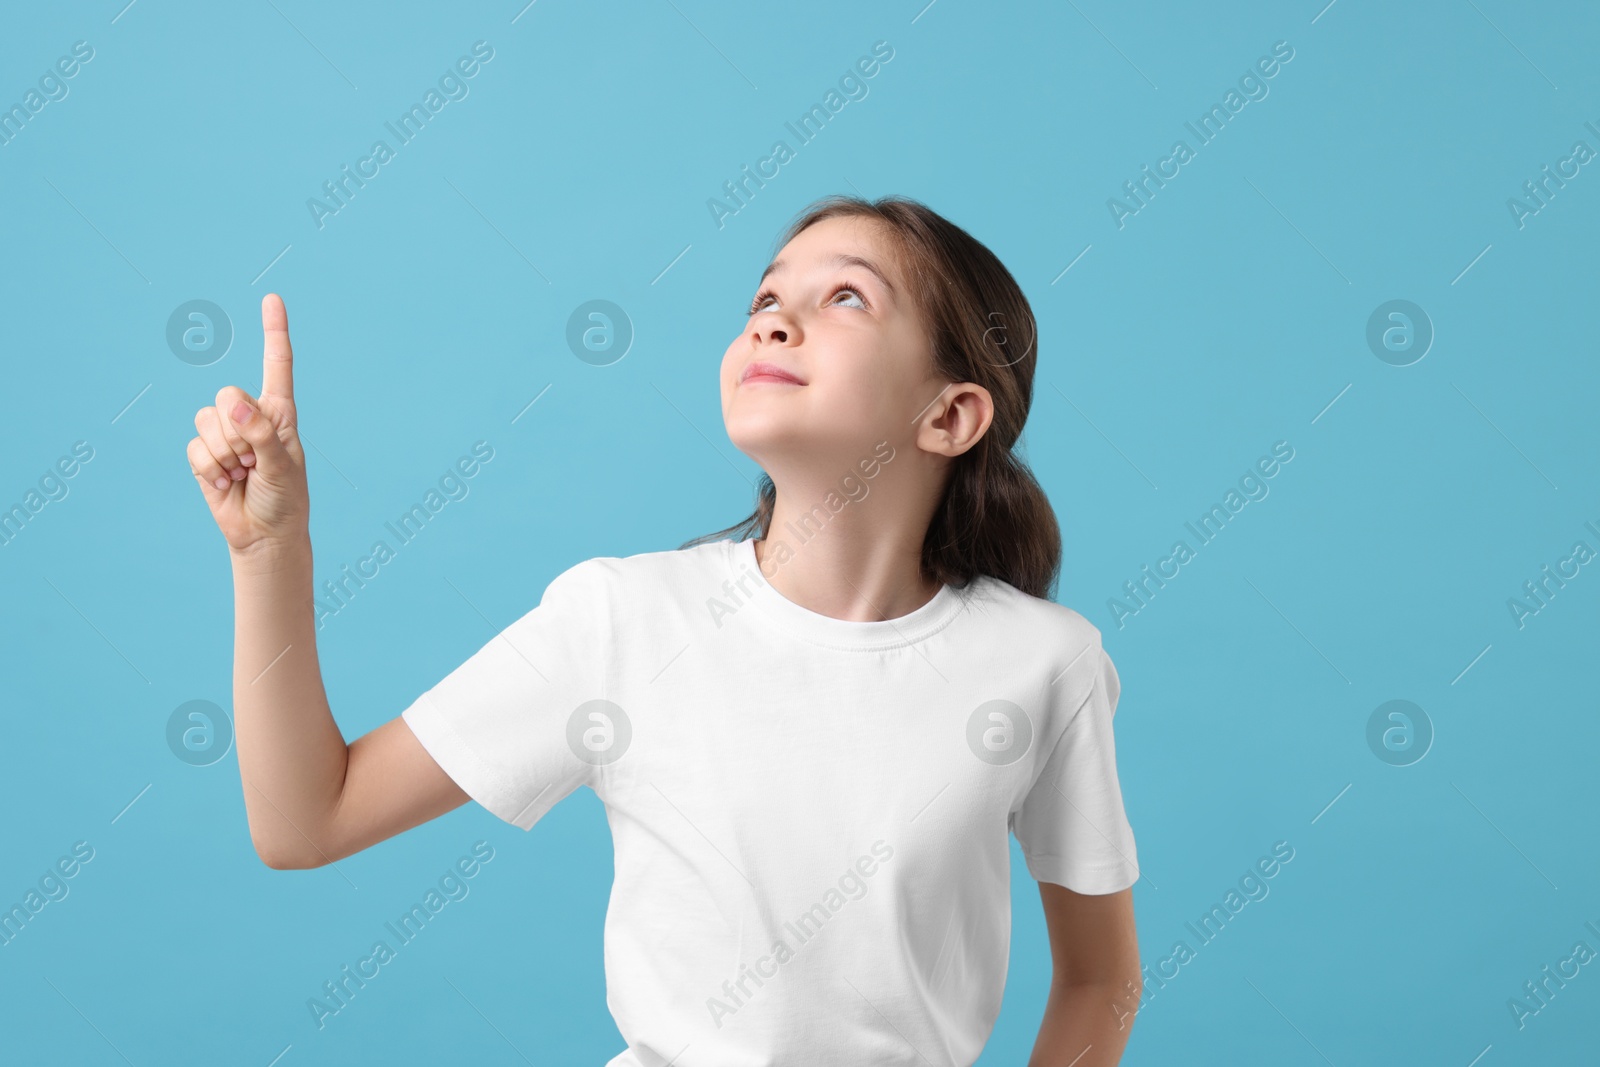 Photo of Beautiful girl pointing at something on light blue background